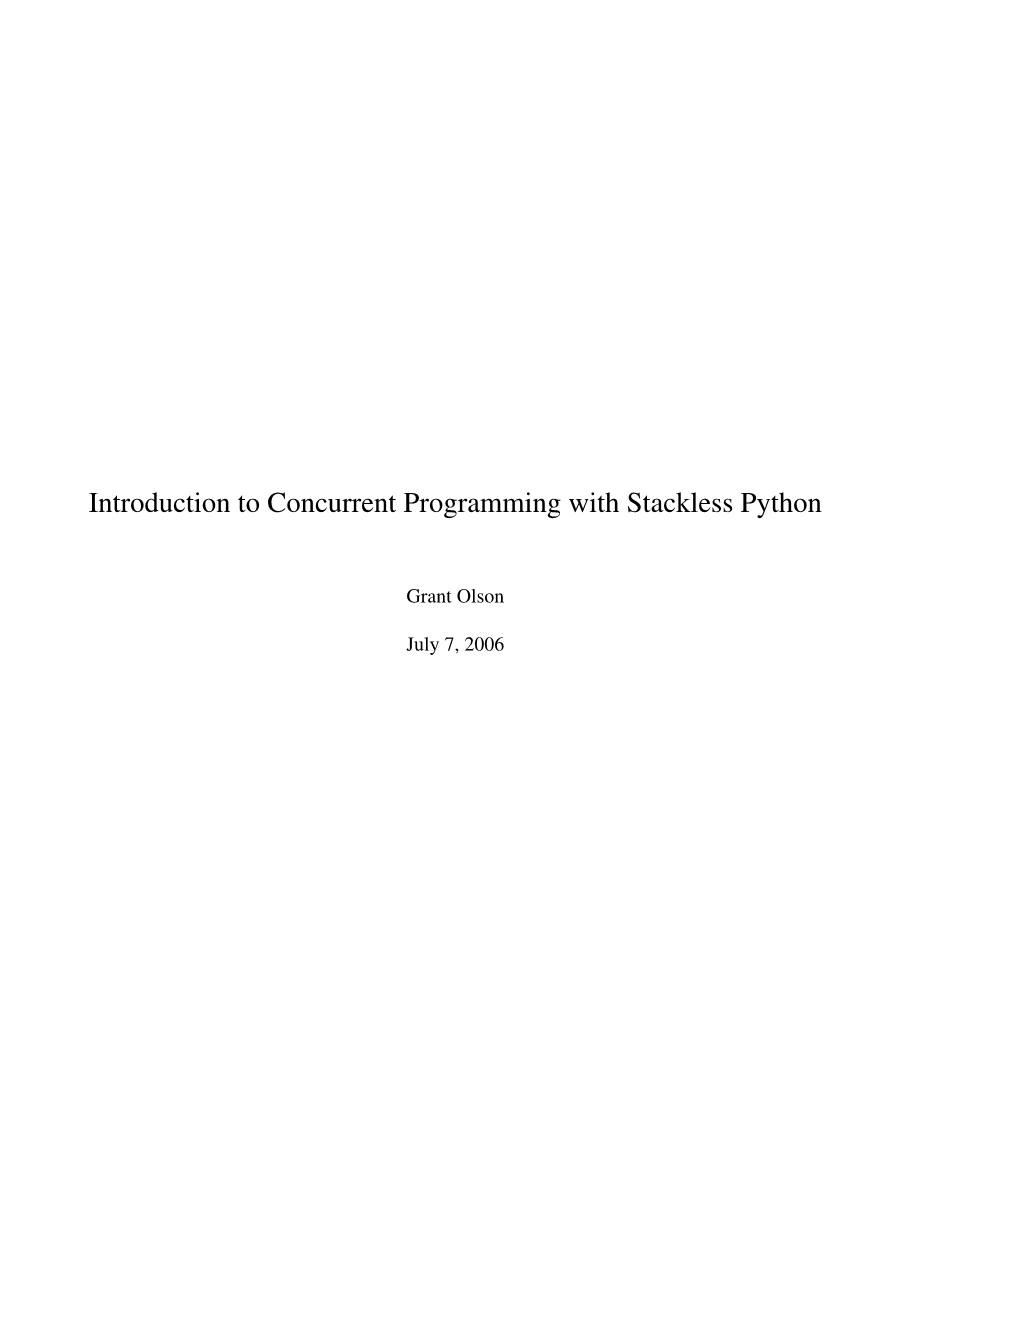 Introduction to Concurrent Programming with Stackless Python